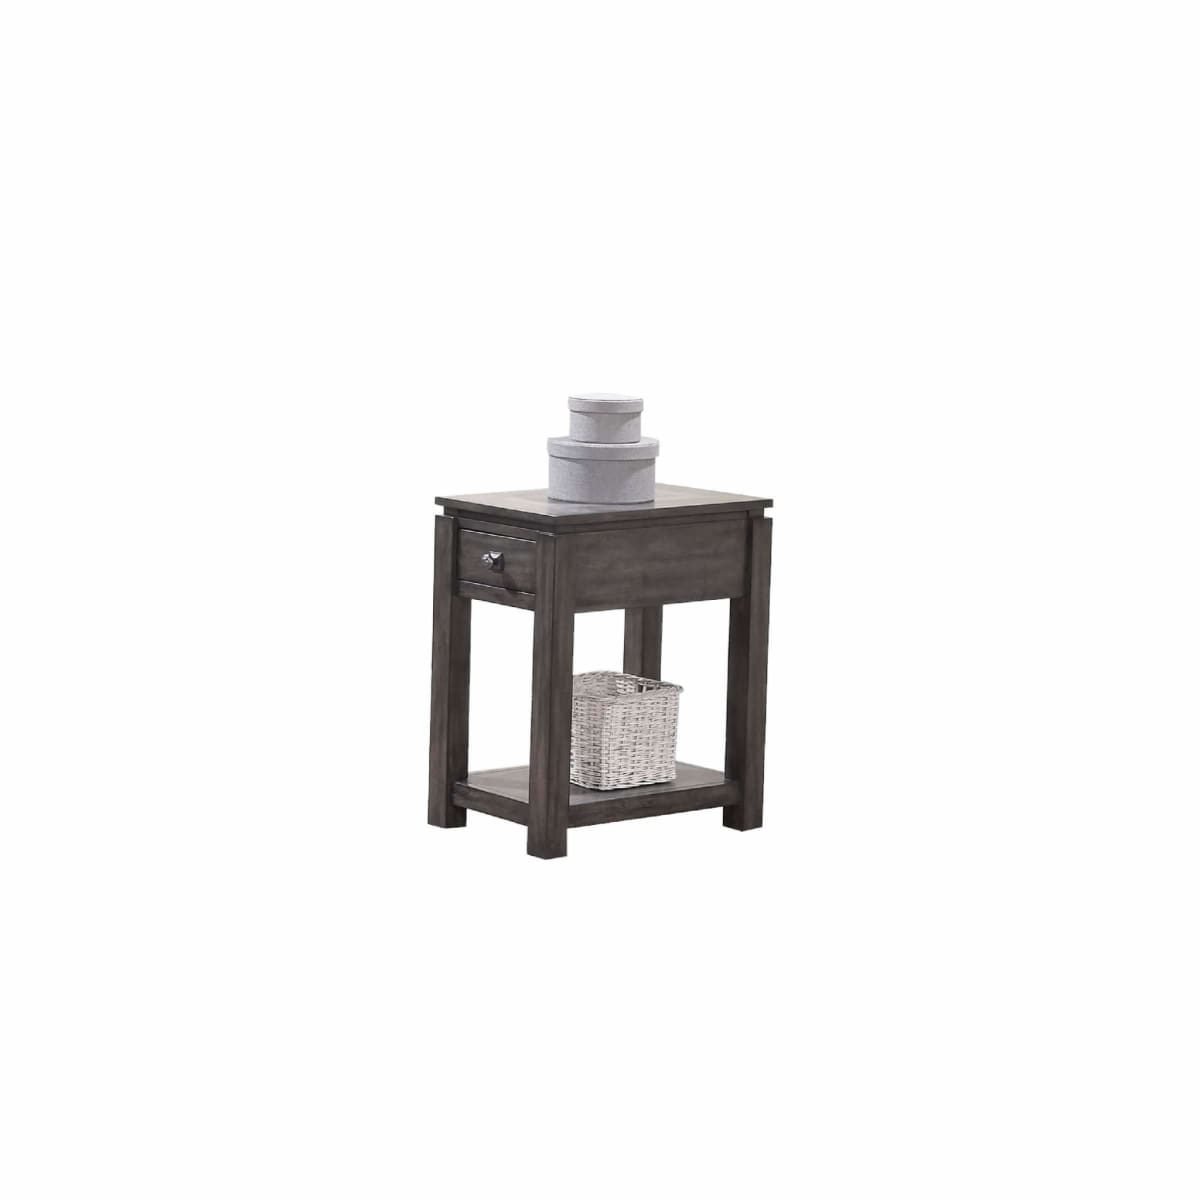 Lancaster 14 Lamp Table - END TABLE/SIDE TABLE